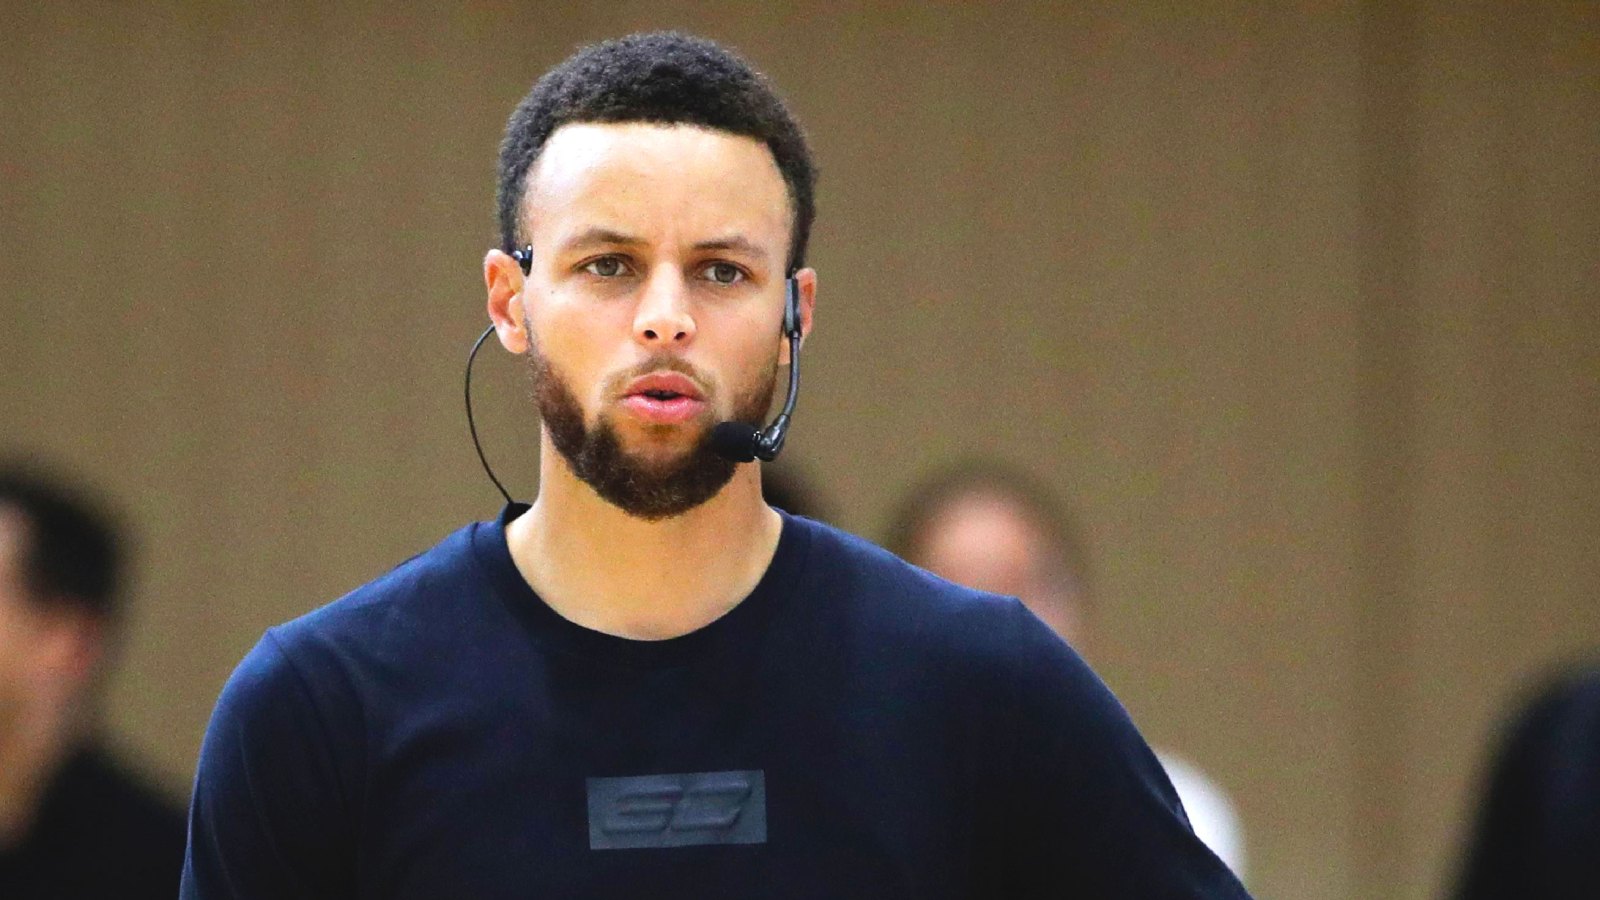 Stephen Curry Diagnosed With Flu, 'No Specific Risk Factors' for the Coronavirus